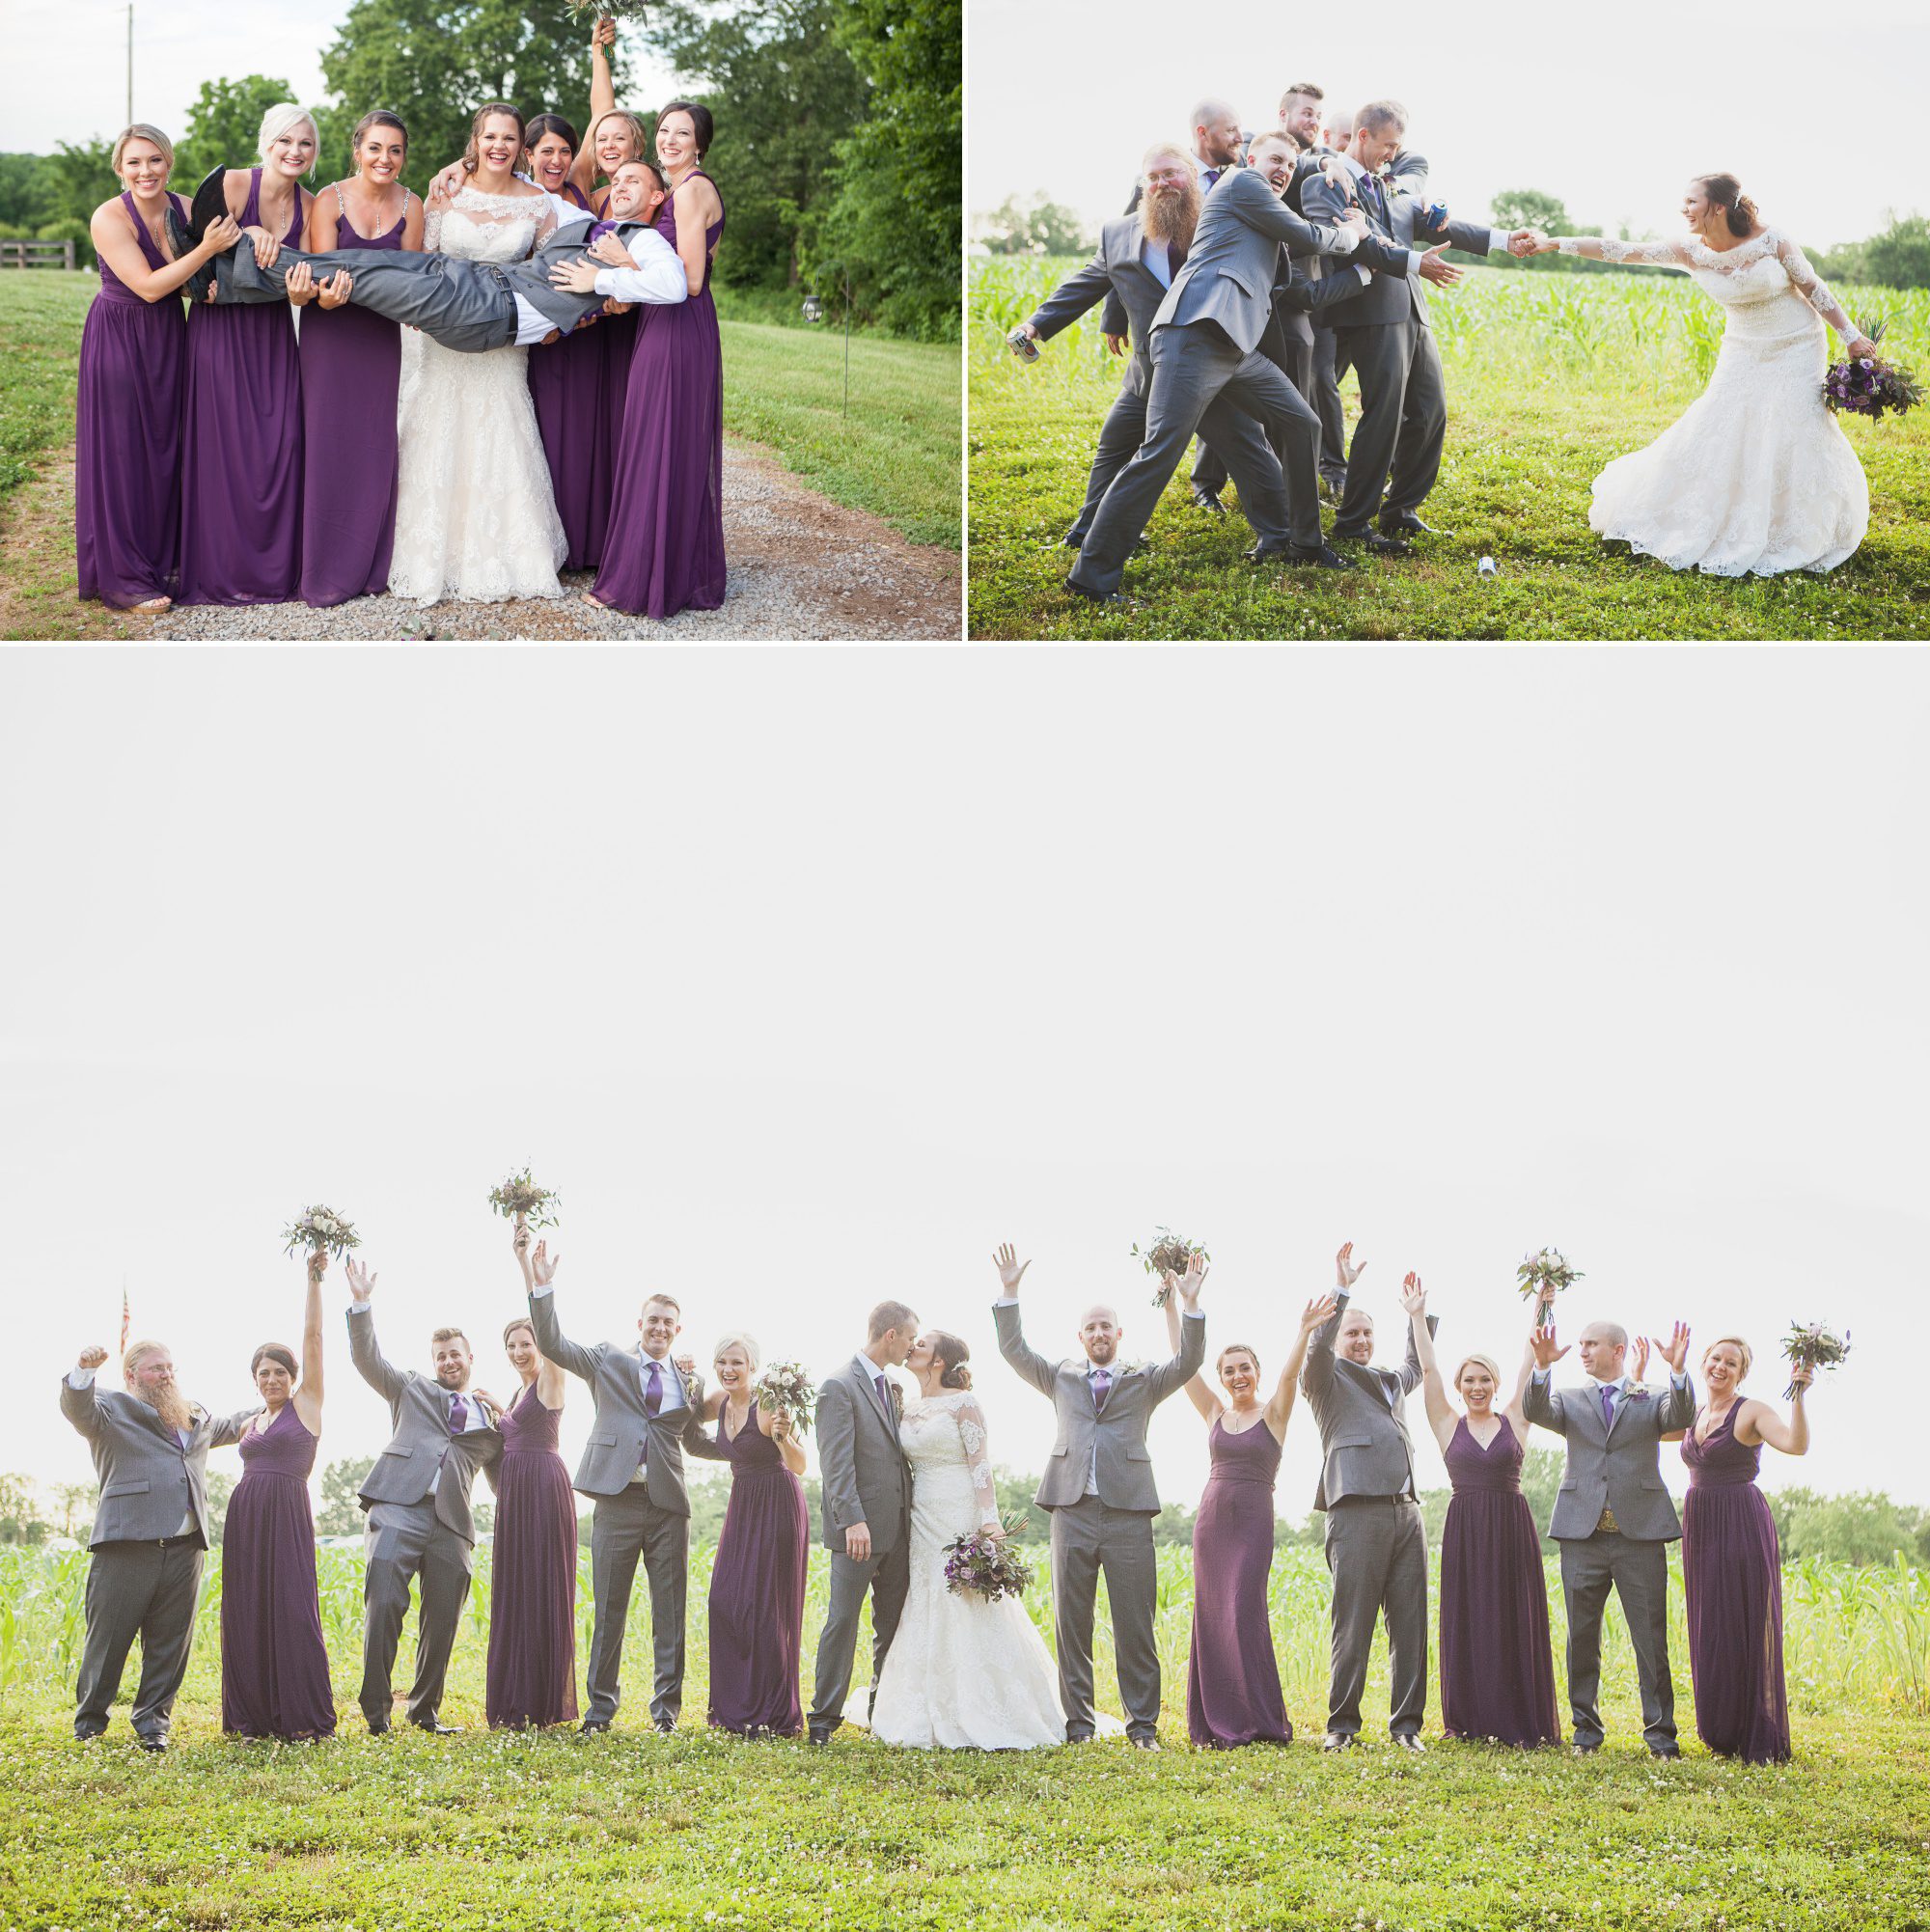 Bridal party photos with bride and groom at summer wedding at Owen Farm in Chapmansboro, TN. Photography by Krista Lee Photography. 